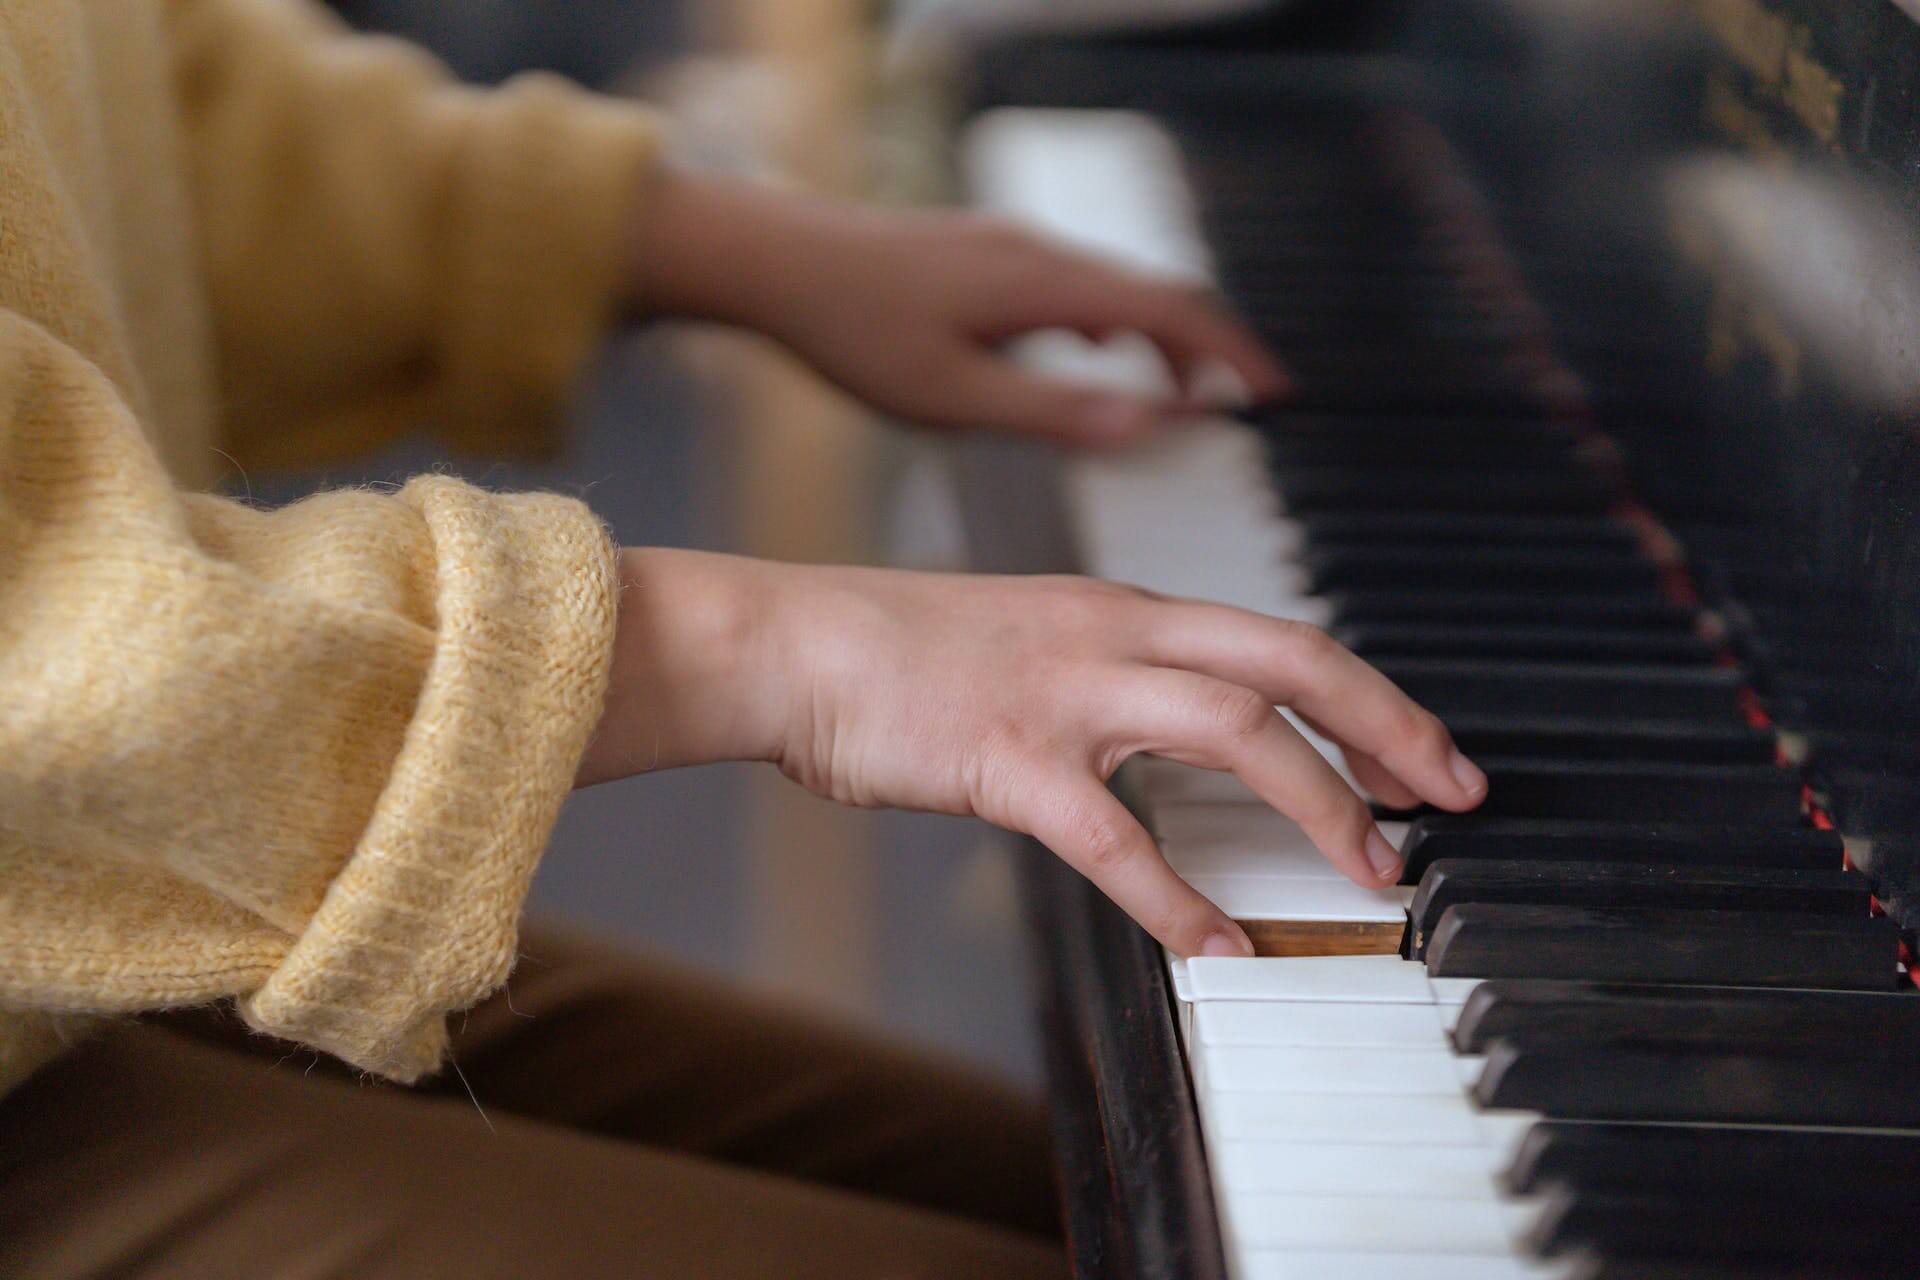 A woman taking adult music lessons to learn how to play piano